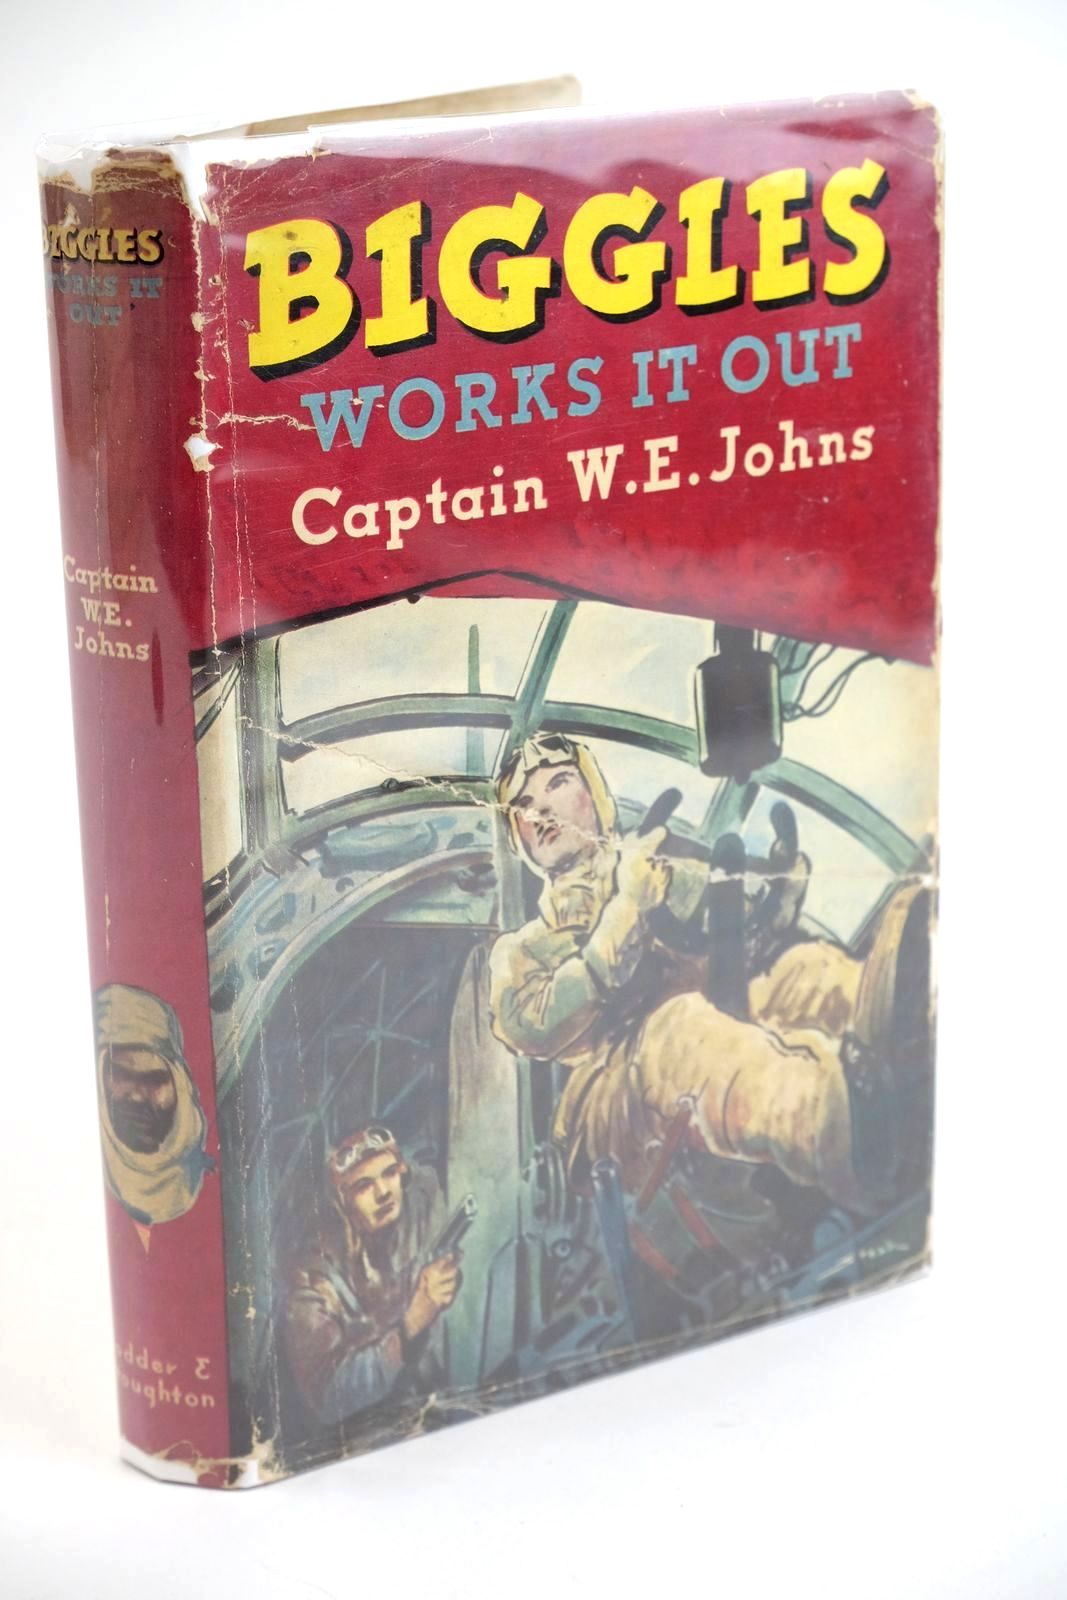 Photo of BIGGLES WORKS IT OUT written by Johns, W.E. illustrated by Stead,  published by Hodder & Stoughton (STOCK CODE: 1323425)  for sale by Stella & Rose's Books